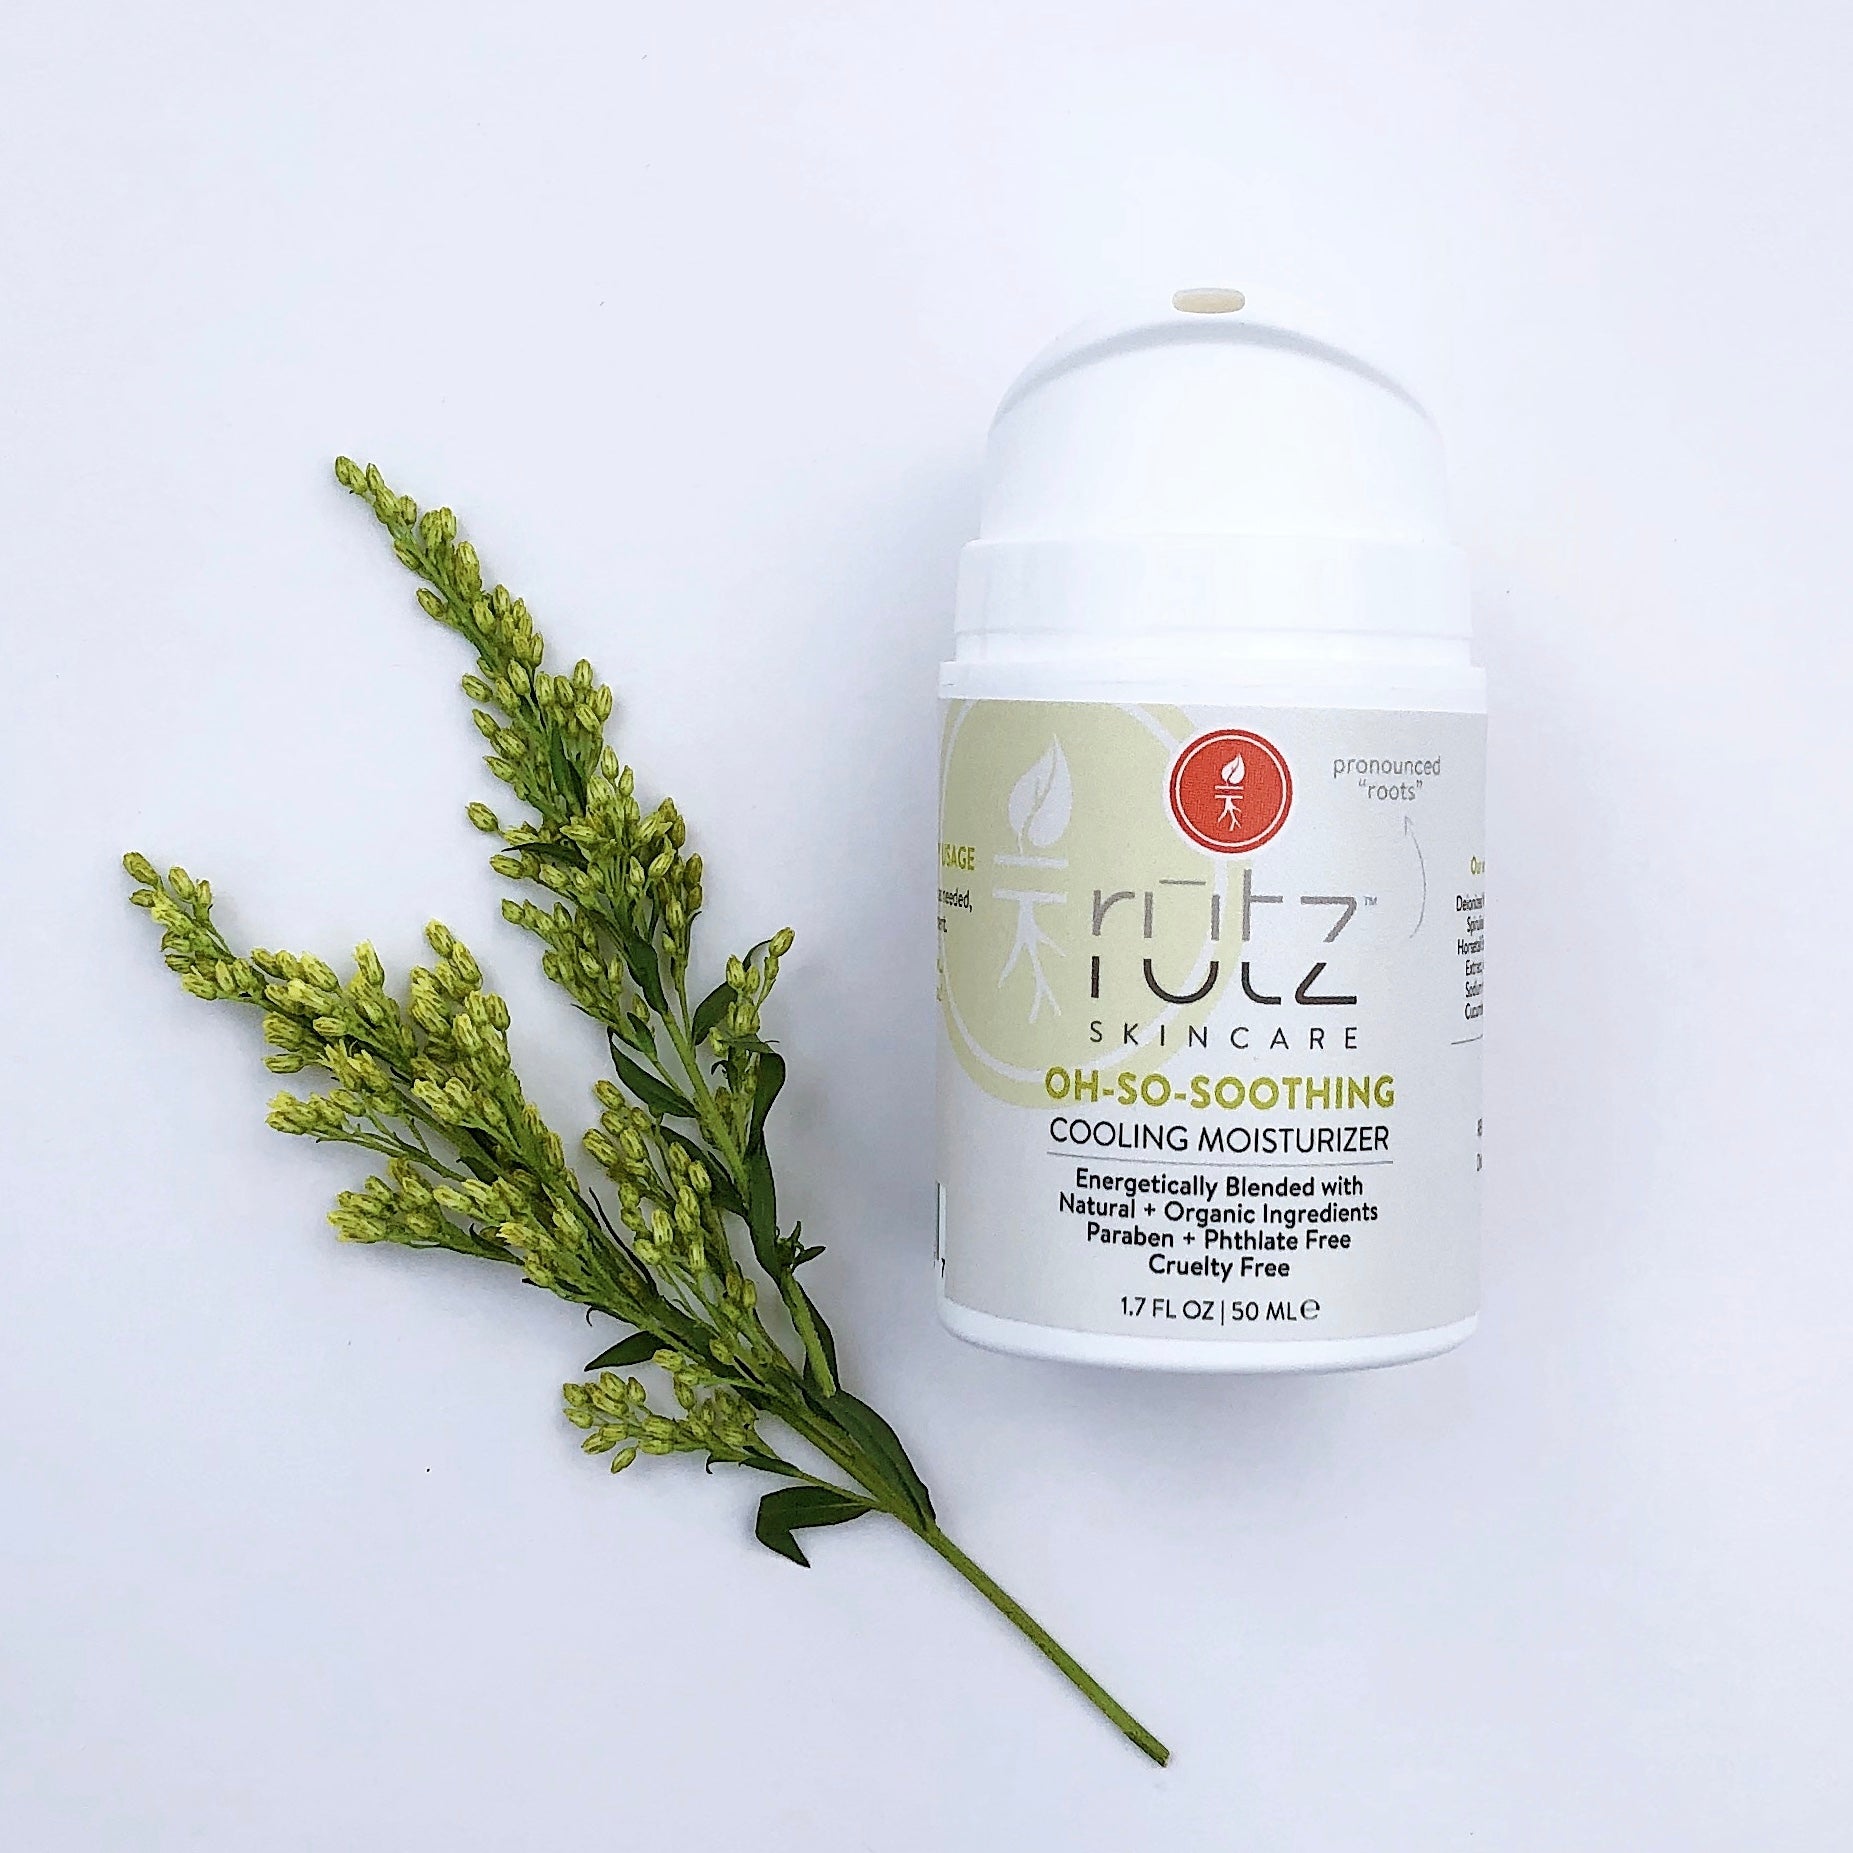 Oh-So Soothing/Cooling Gel Moisturizer by Rutz Naturals